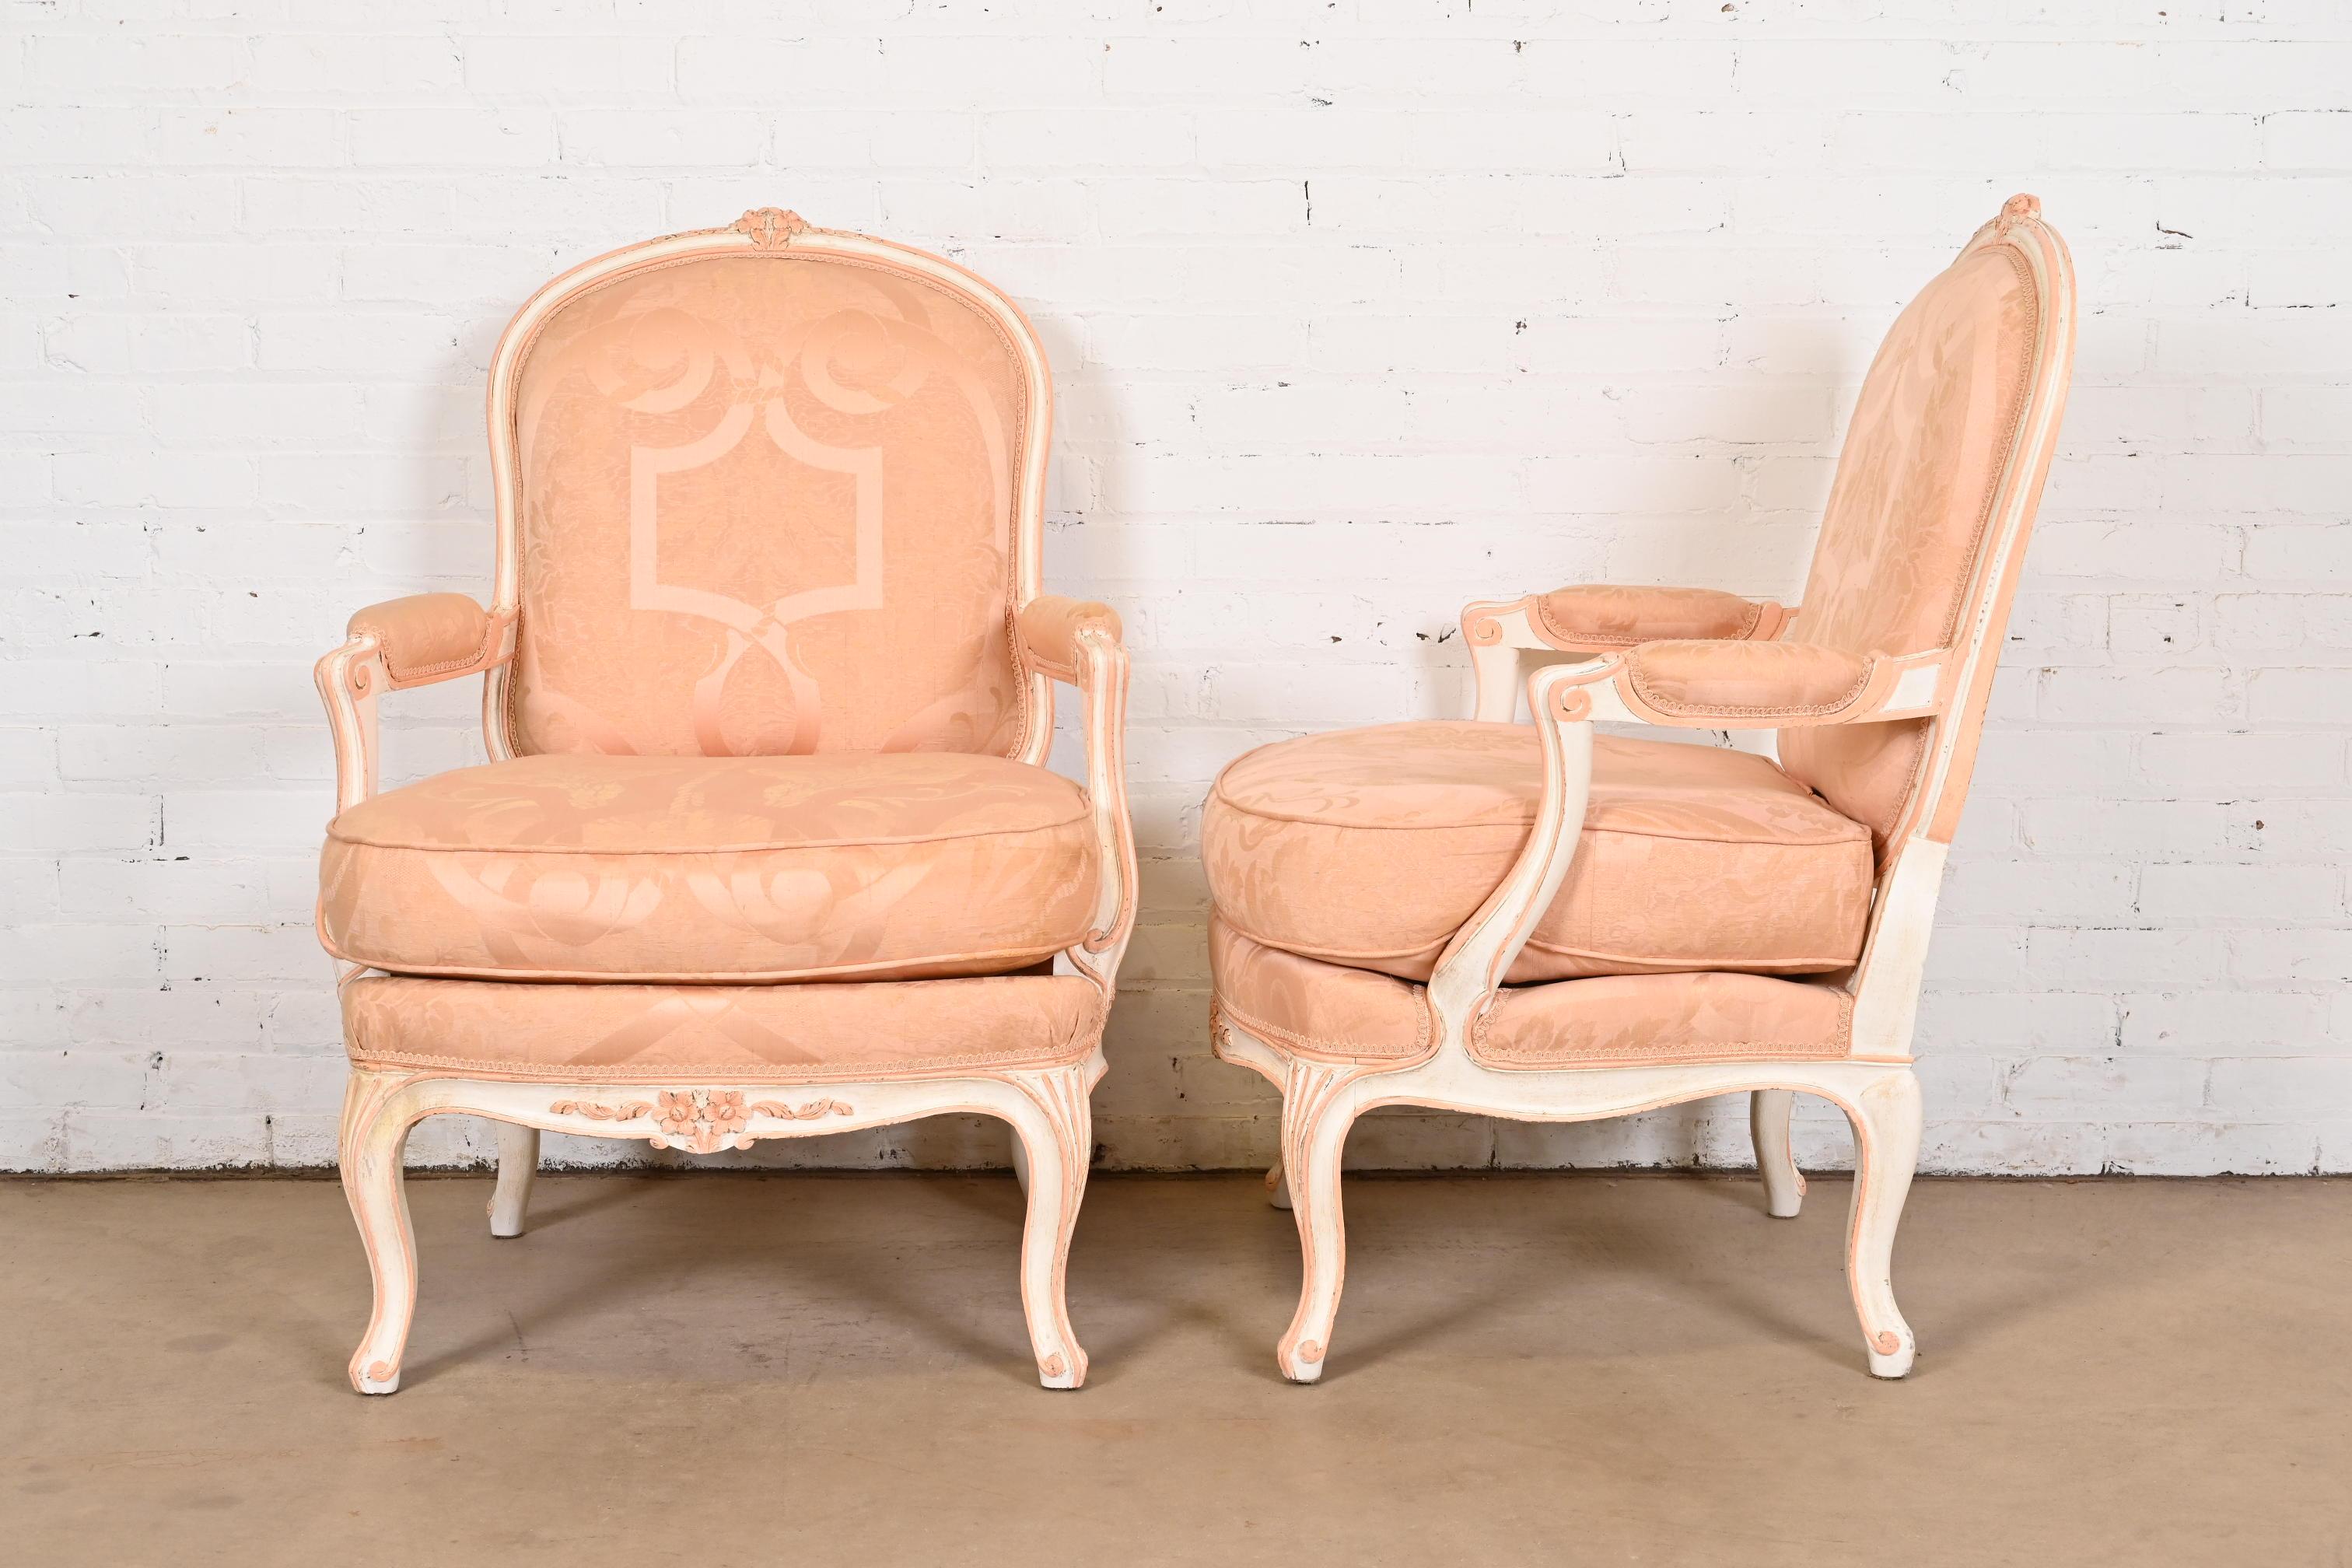 French Provincial Louis XV Carved Painted Walnut Fauteuils, Pair For Sale 8